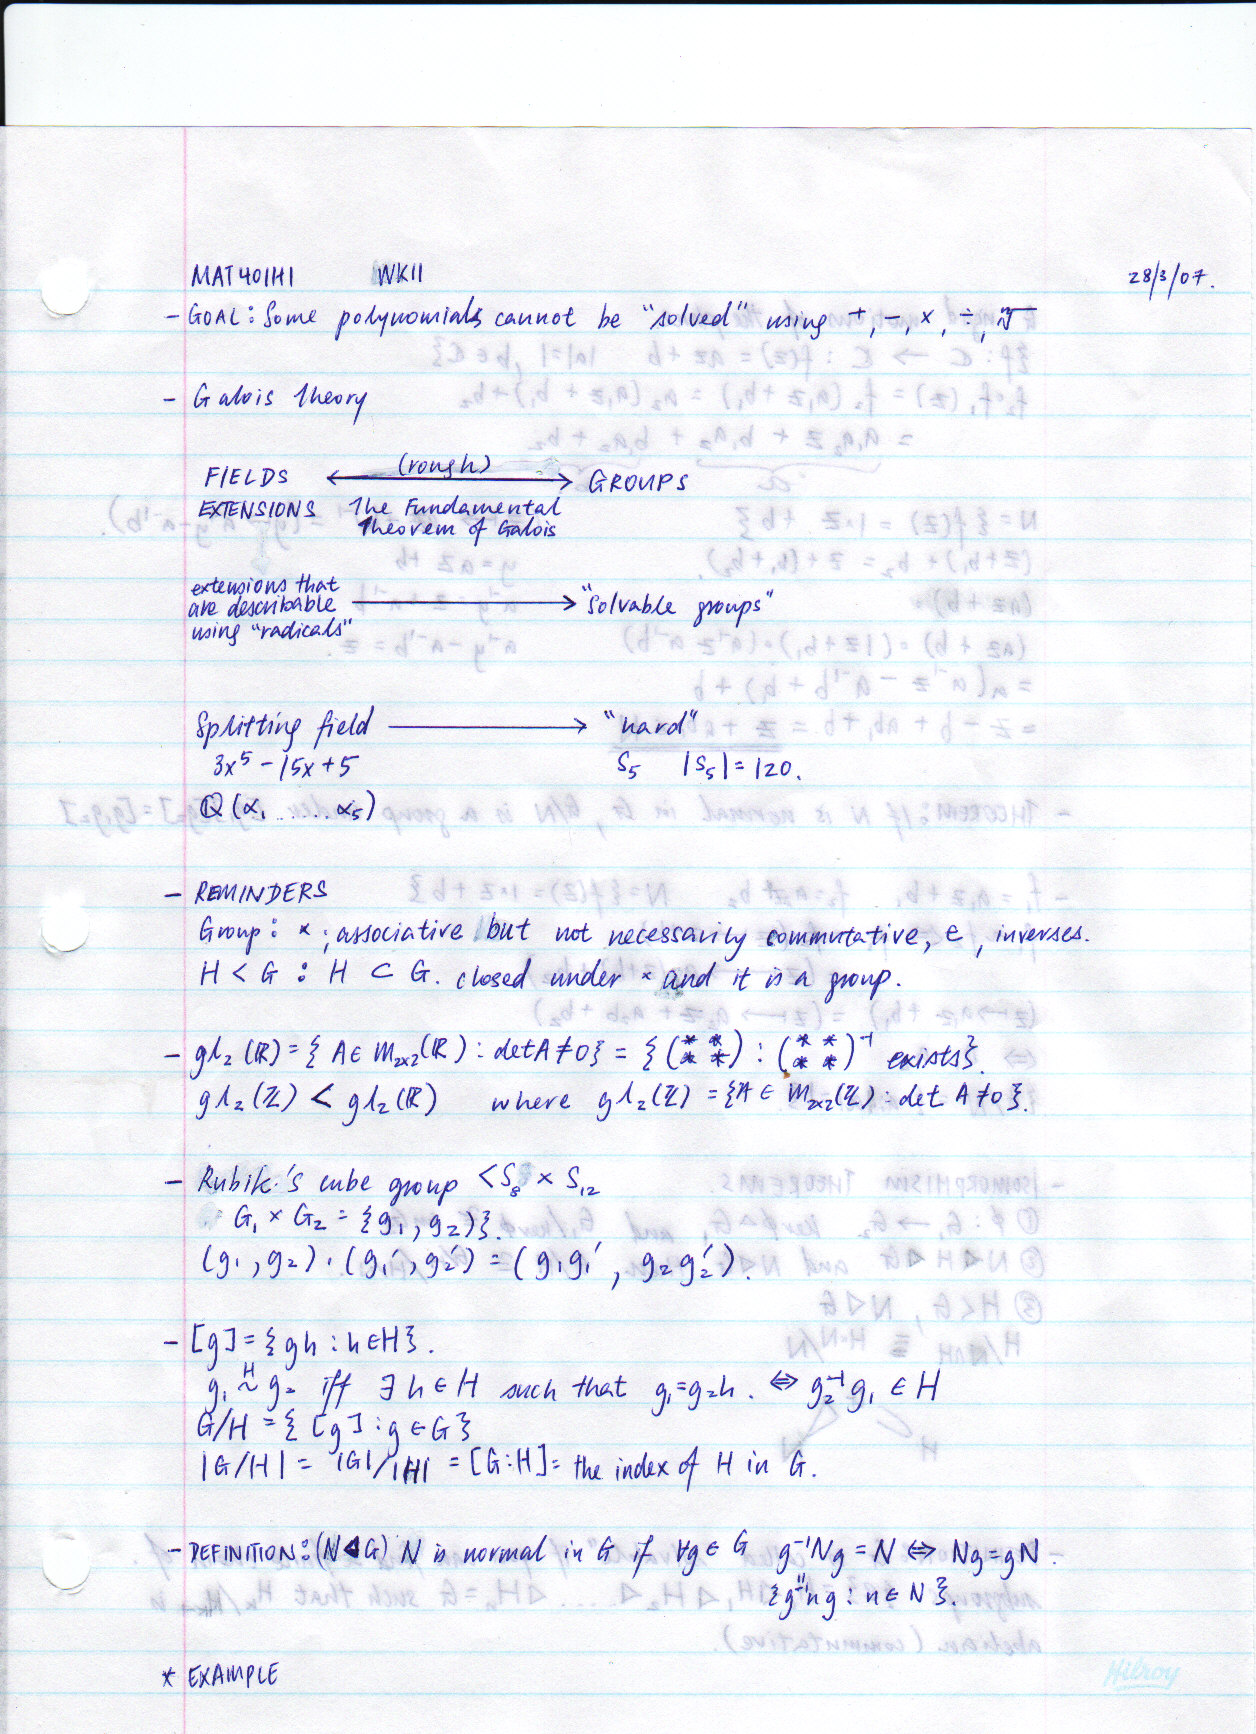 07-401 lecture 11 pg 1.jpg